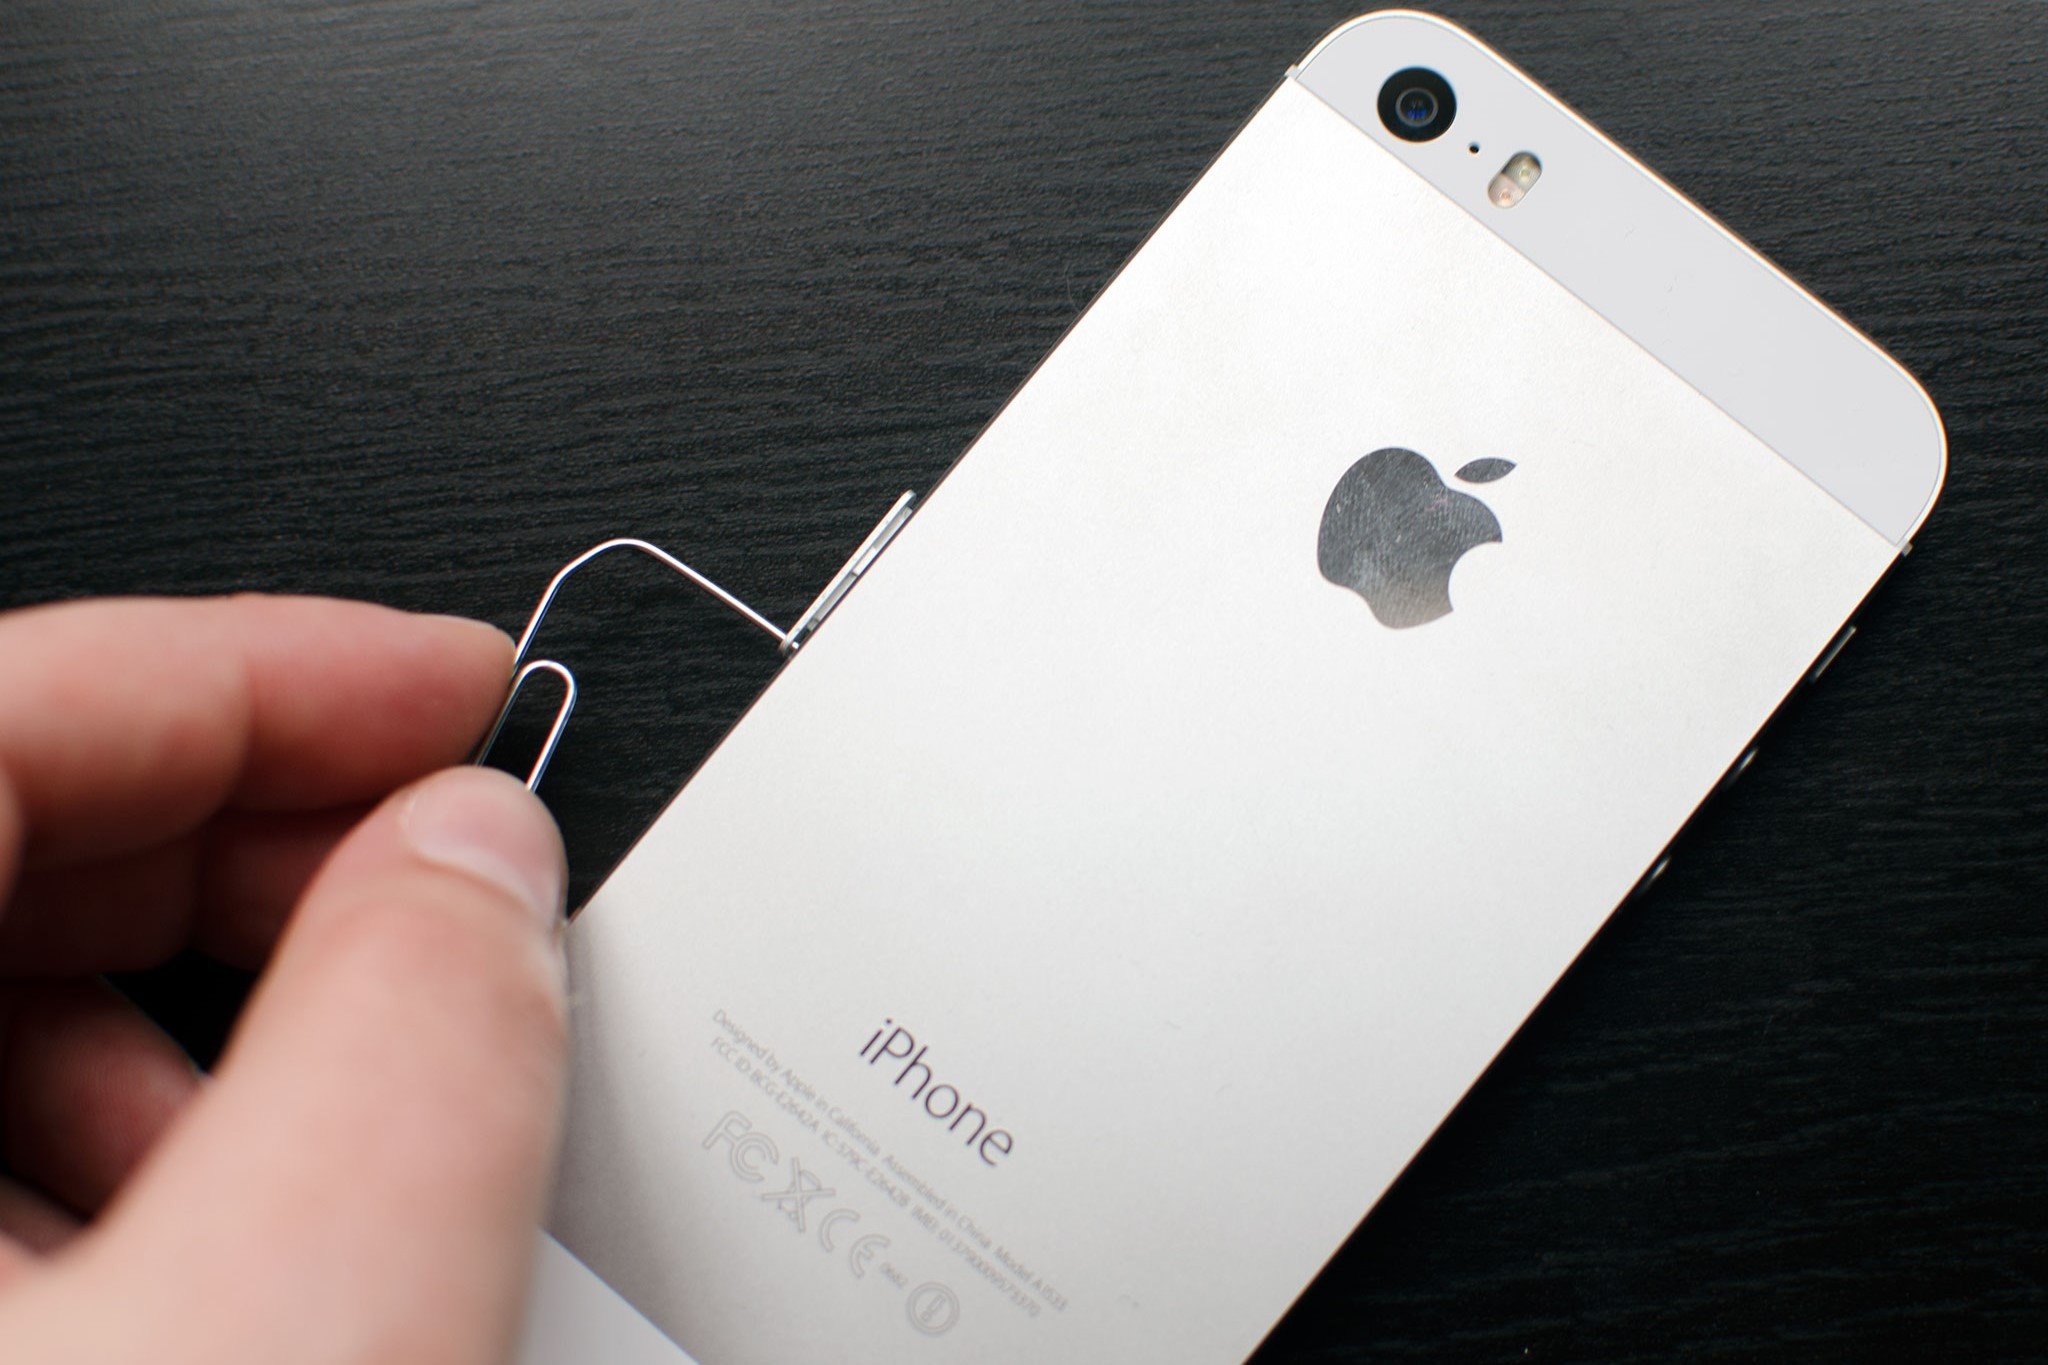 transferring-your-sim-card-to-a-new-iphone-step-by-step-guide